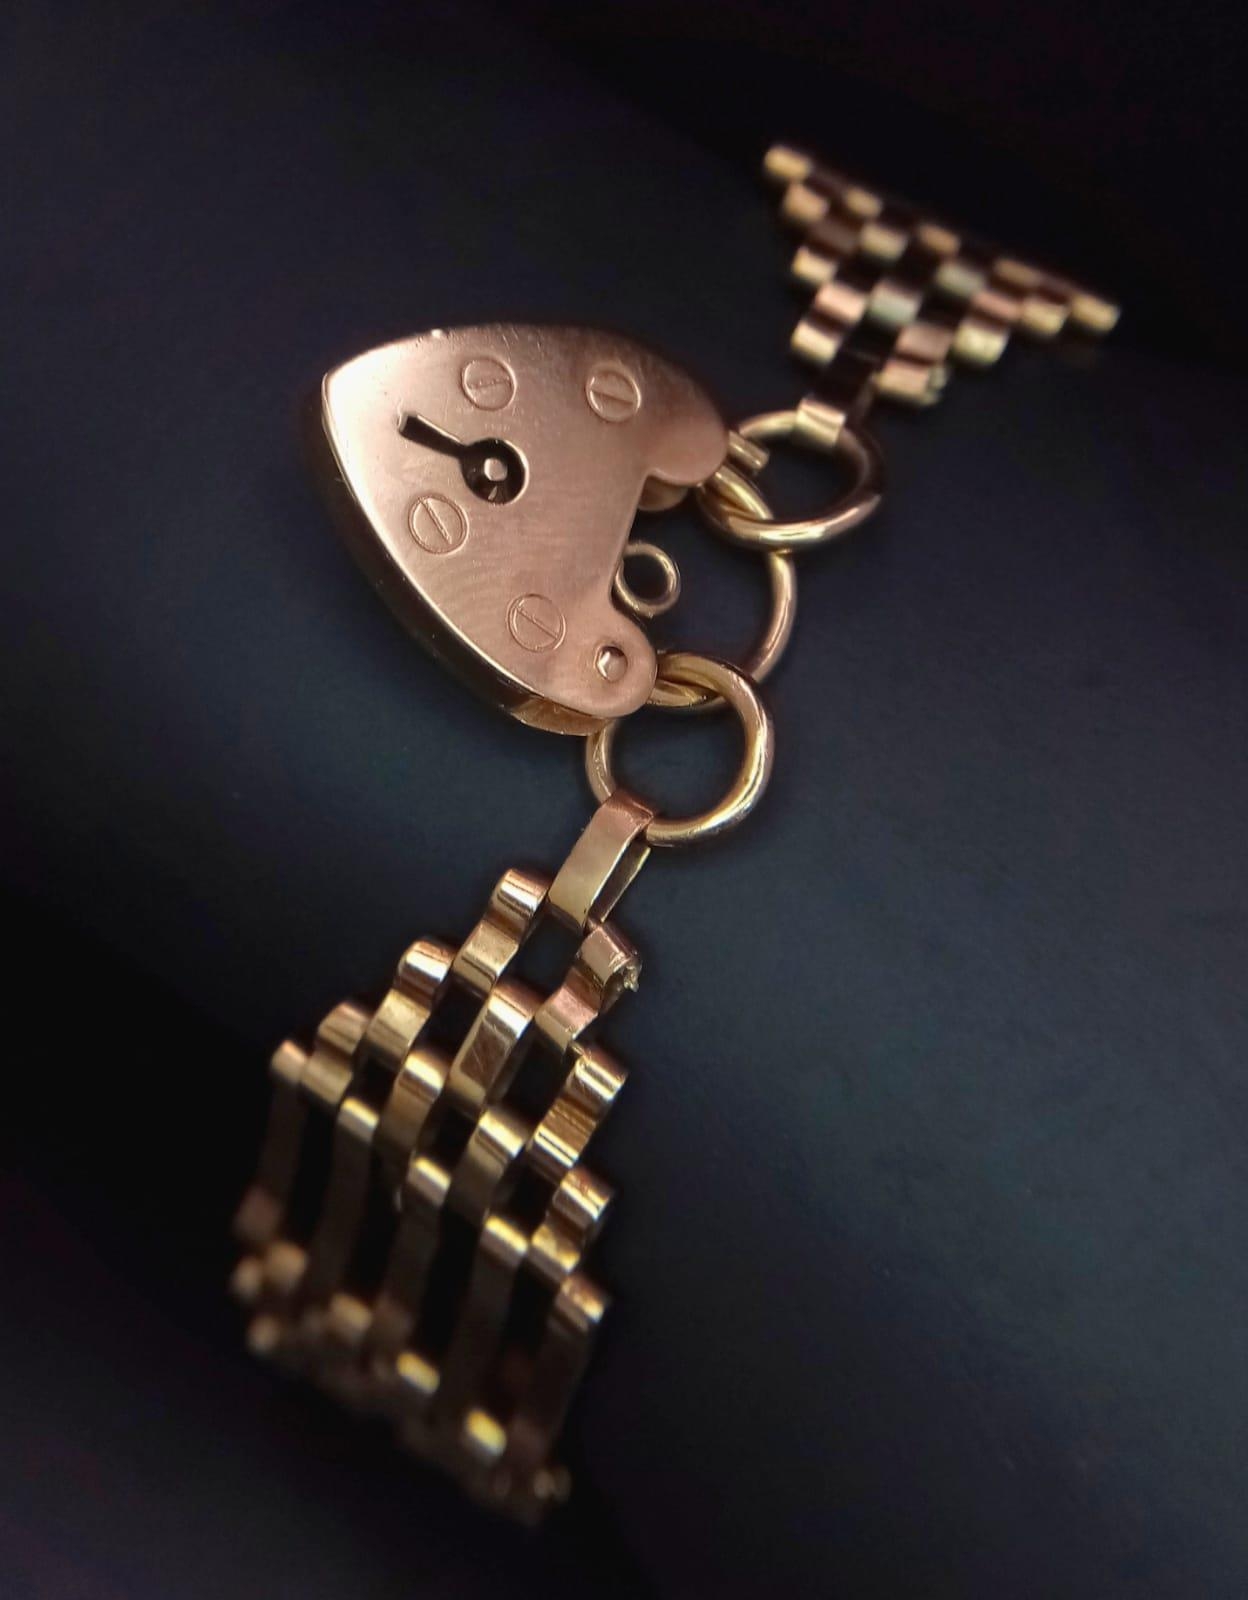 A VINTAGE 9K ROSE GOLD GATE BRACELET WITH INDIVIDUAL HALLMARKS ON EVERY GATE AND HEART SHAPED - Image 2 of 4